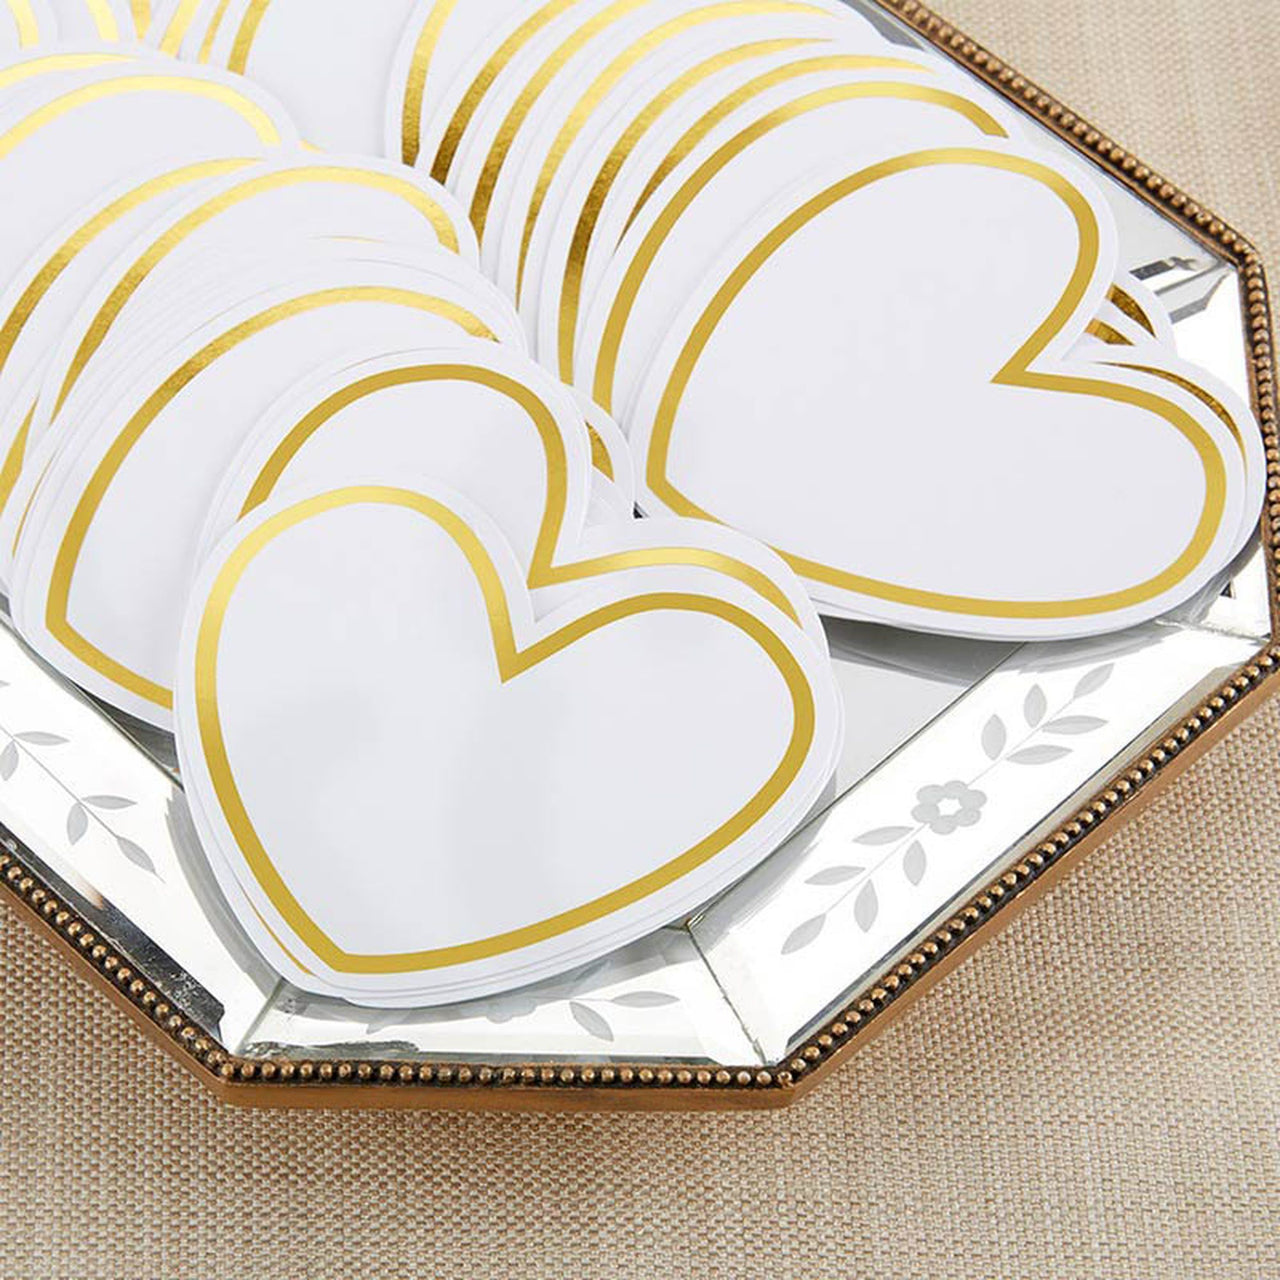 Heart Shaped Cards for Wish Jar (Set of 100) - Alternate Image 3 | My Wedding Favors